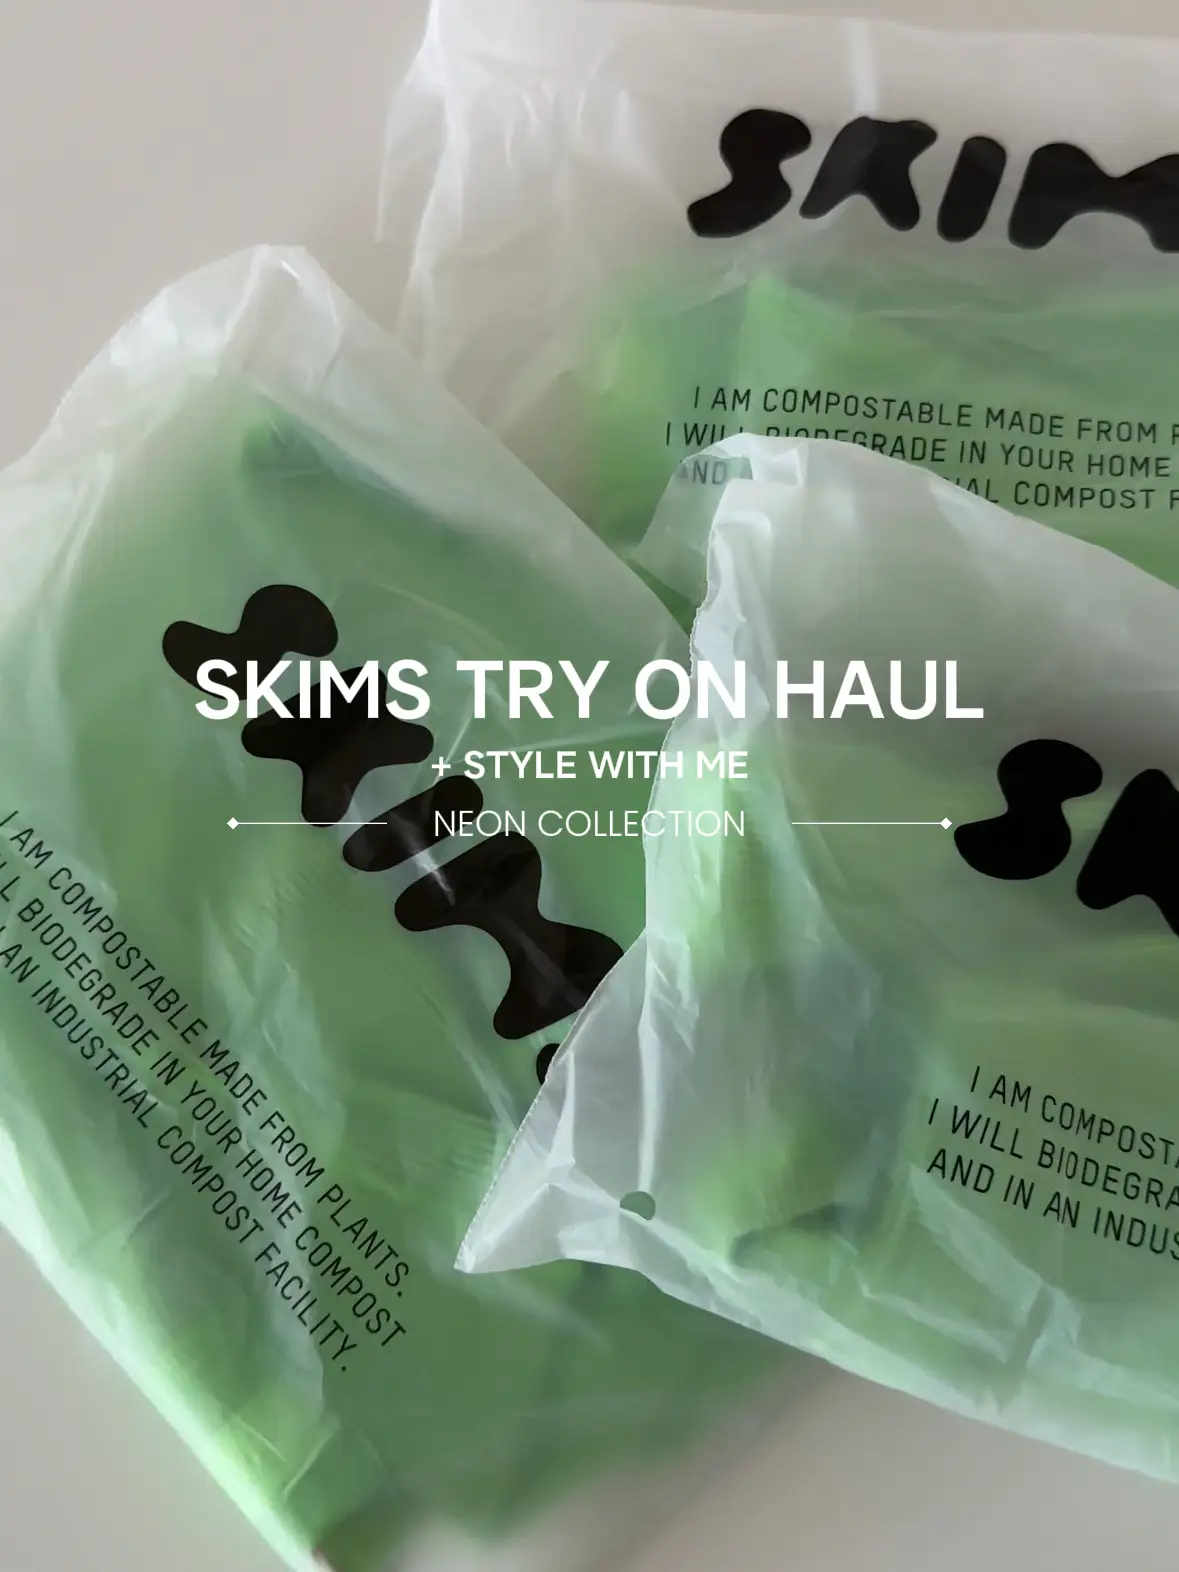 NEW IN SKIMS MIDSIZE TRY ON HAUL